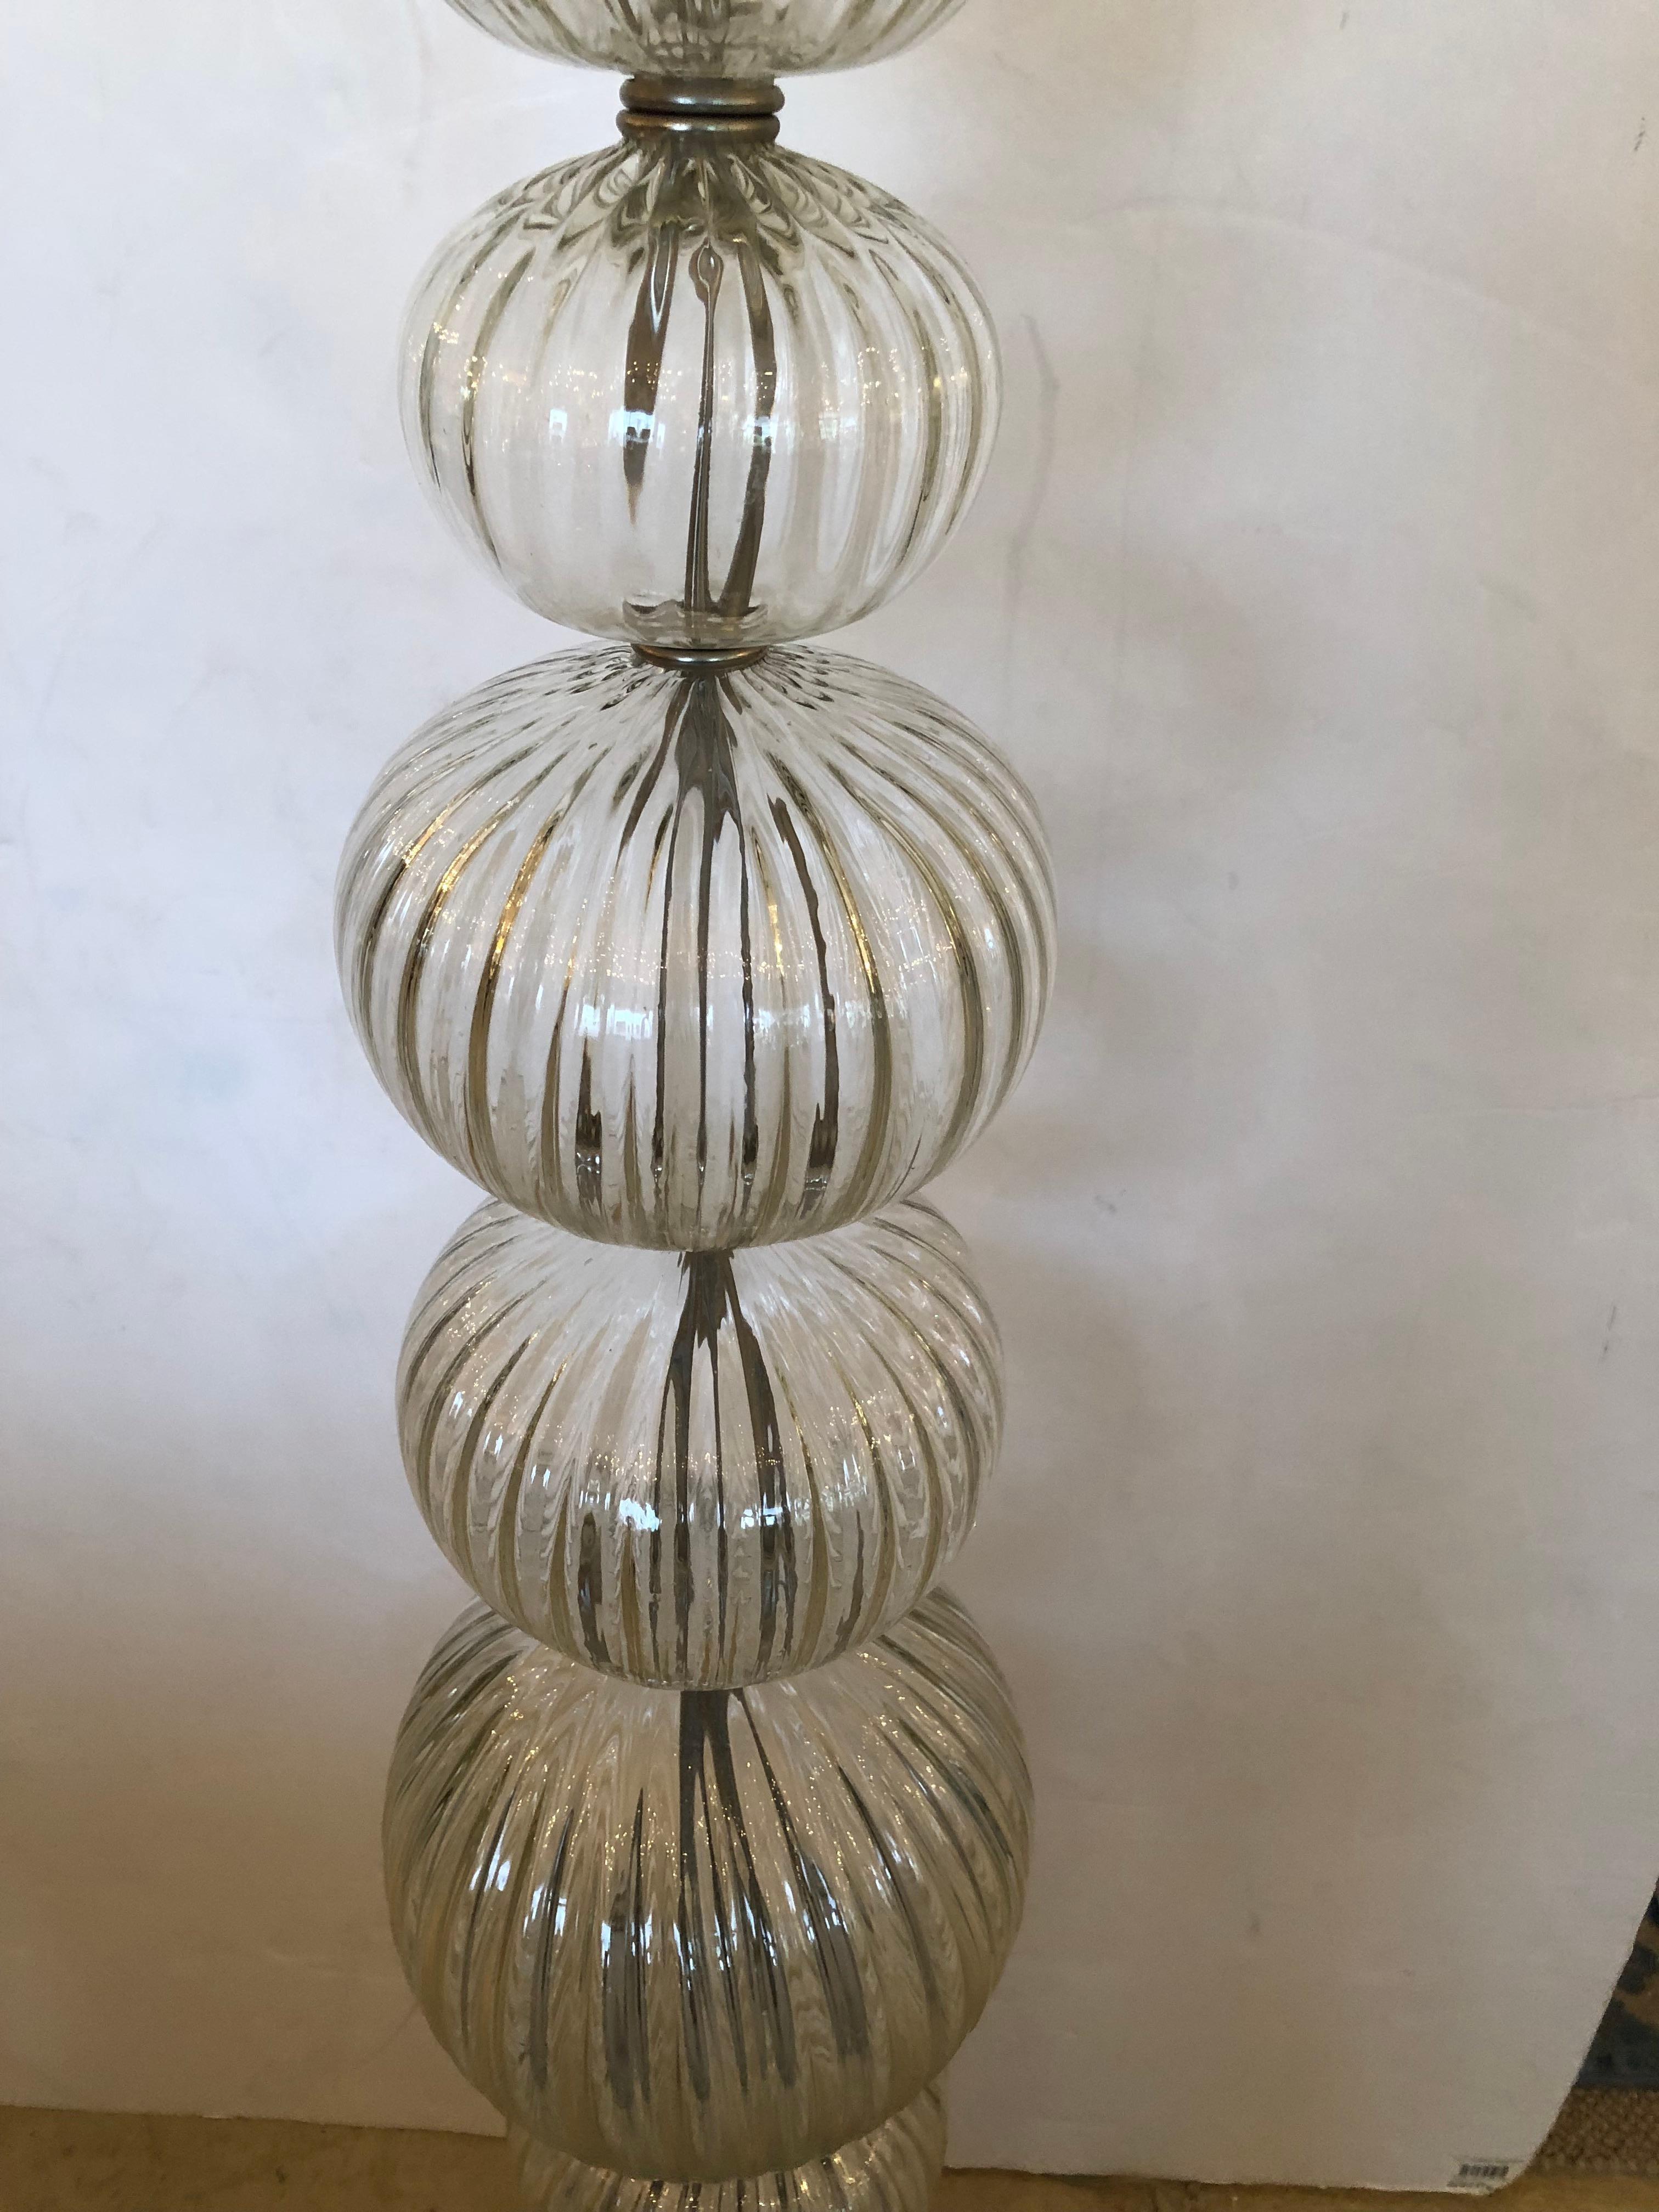 Elegant transparent Murano glass floor lamp having a column constructed of stacked ribbed round globes with steel in between and round steel base. Beautiful bronze flame shaped finial at the top.
Shade is optional. The one shown is 15.5 diameter.